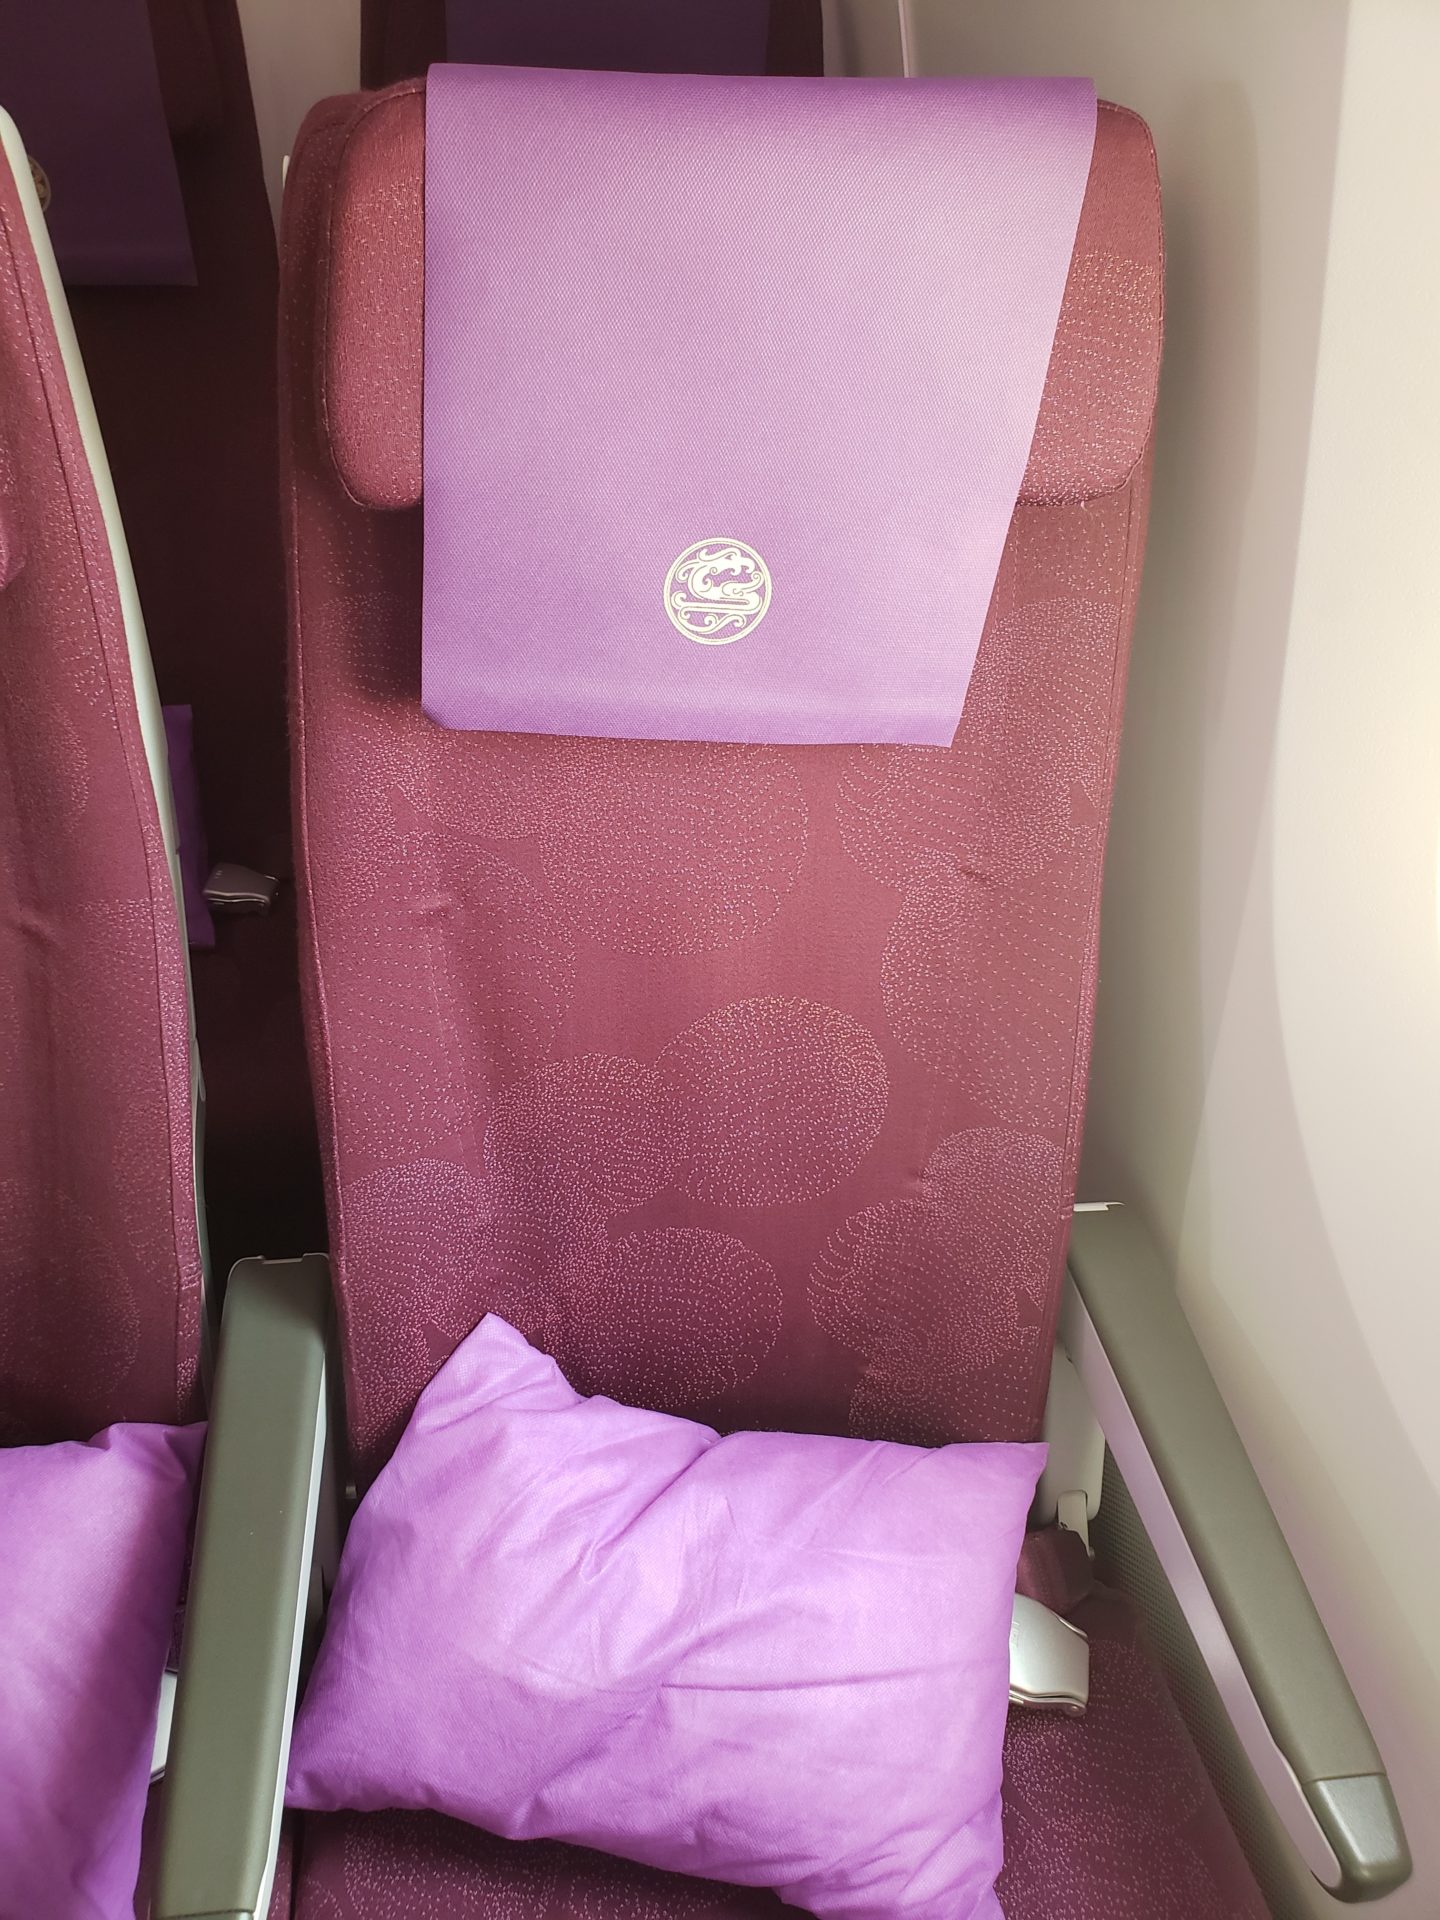 a purple pillow on a chair